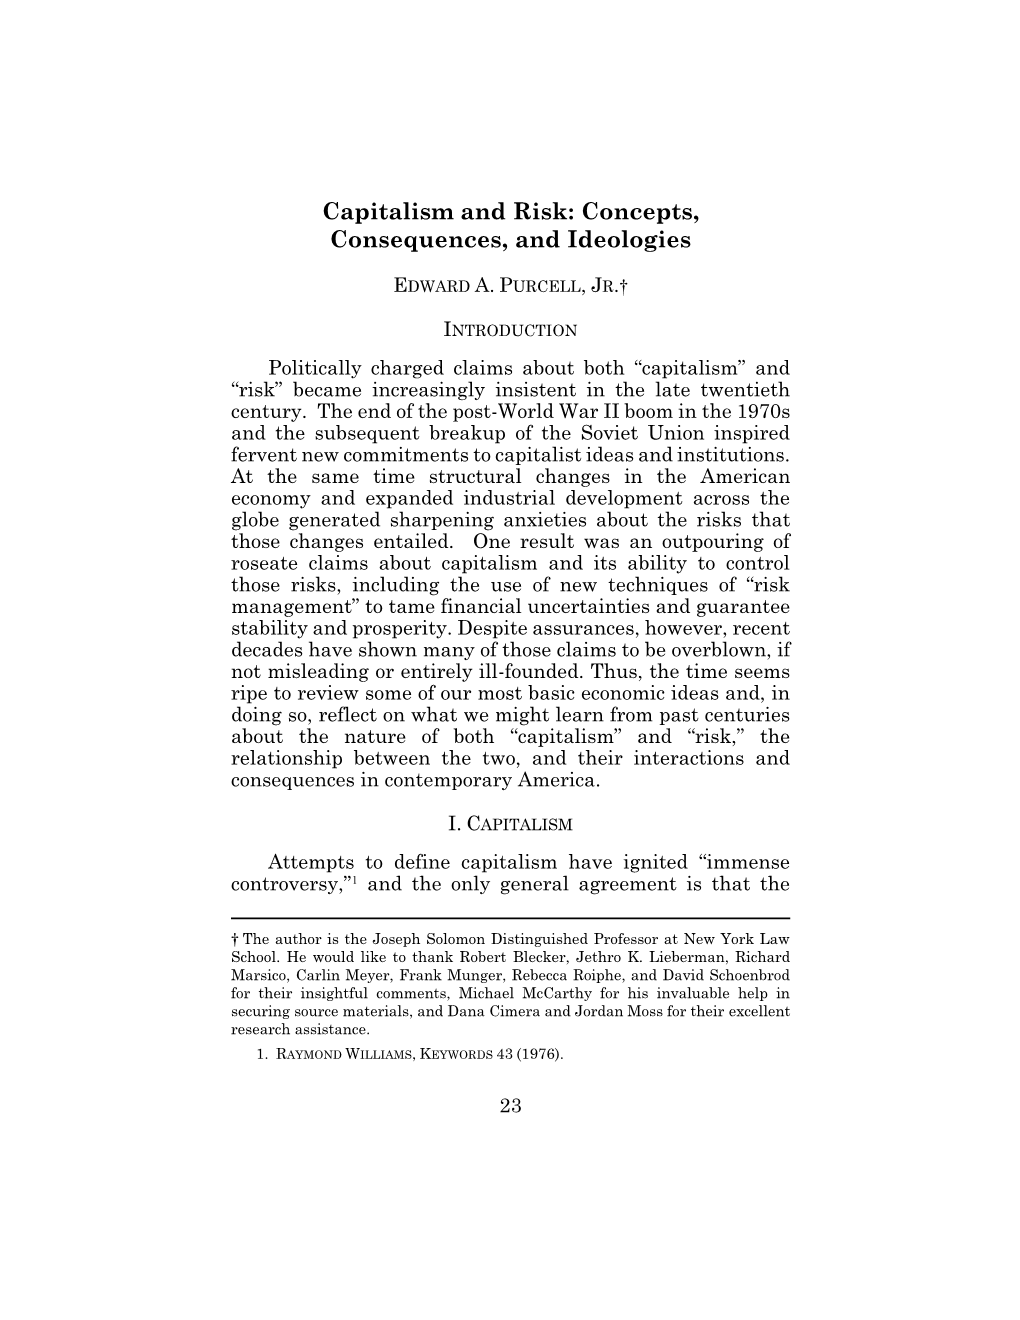 Edward A. Purcell, Jr., Capitalism and Risk